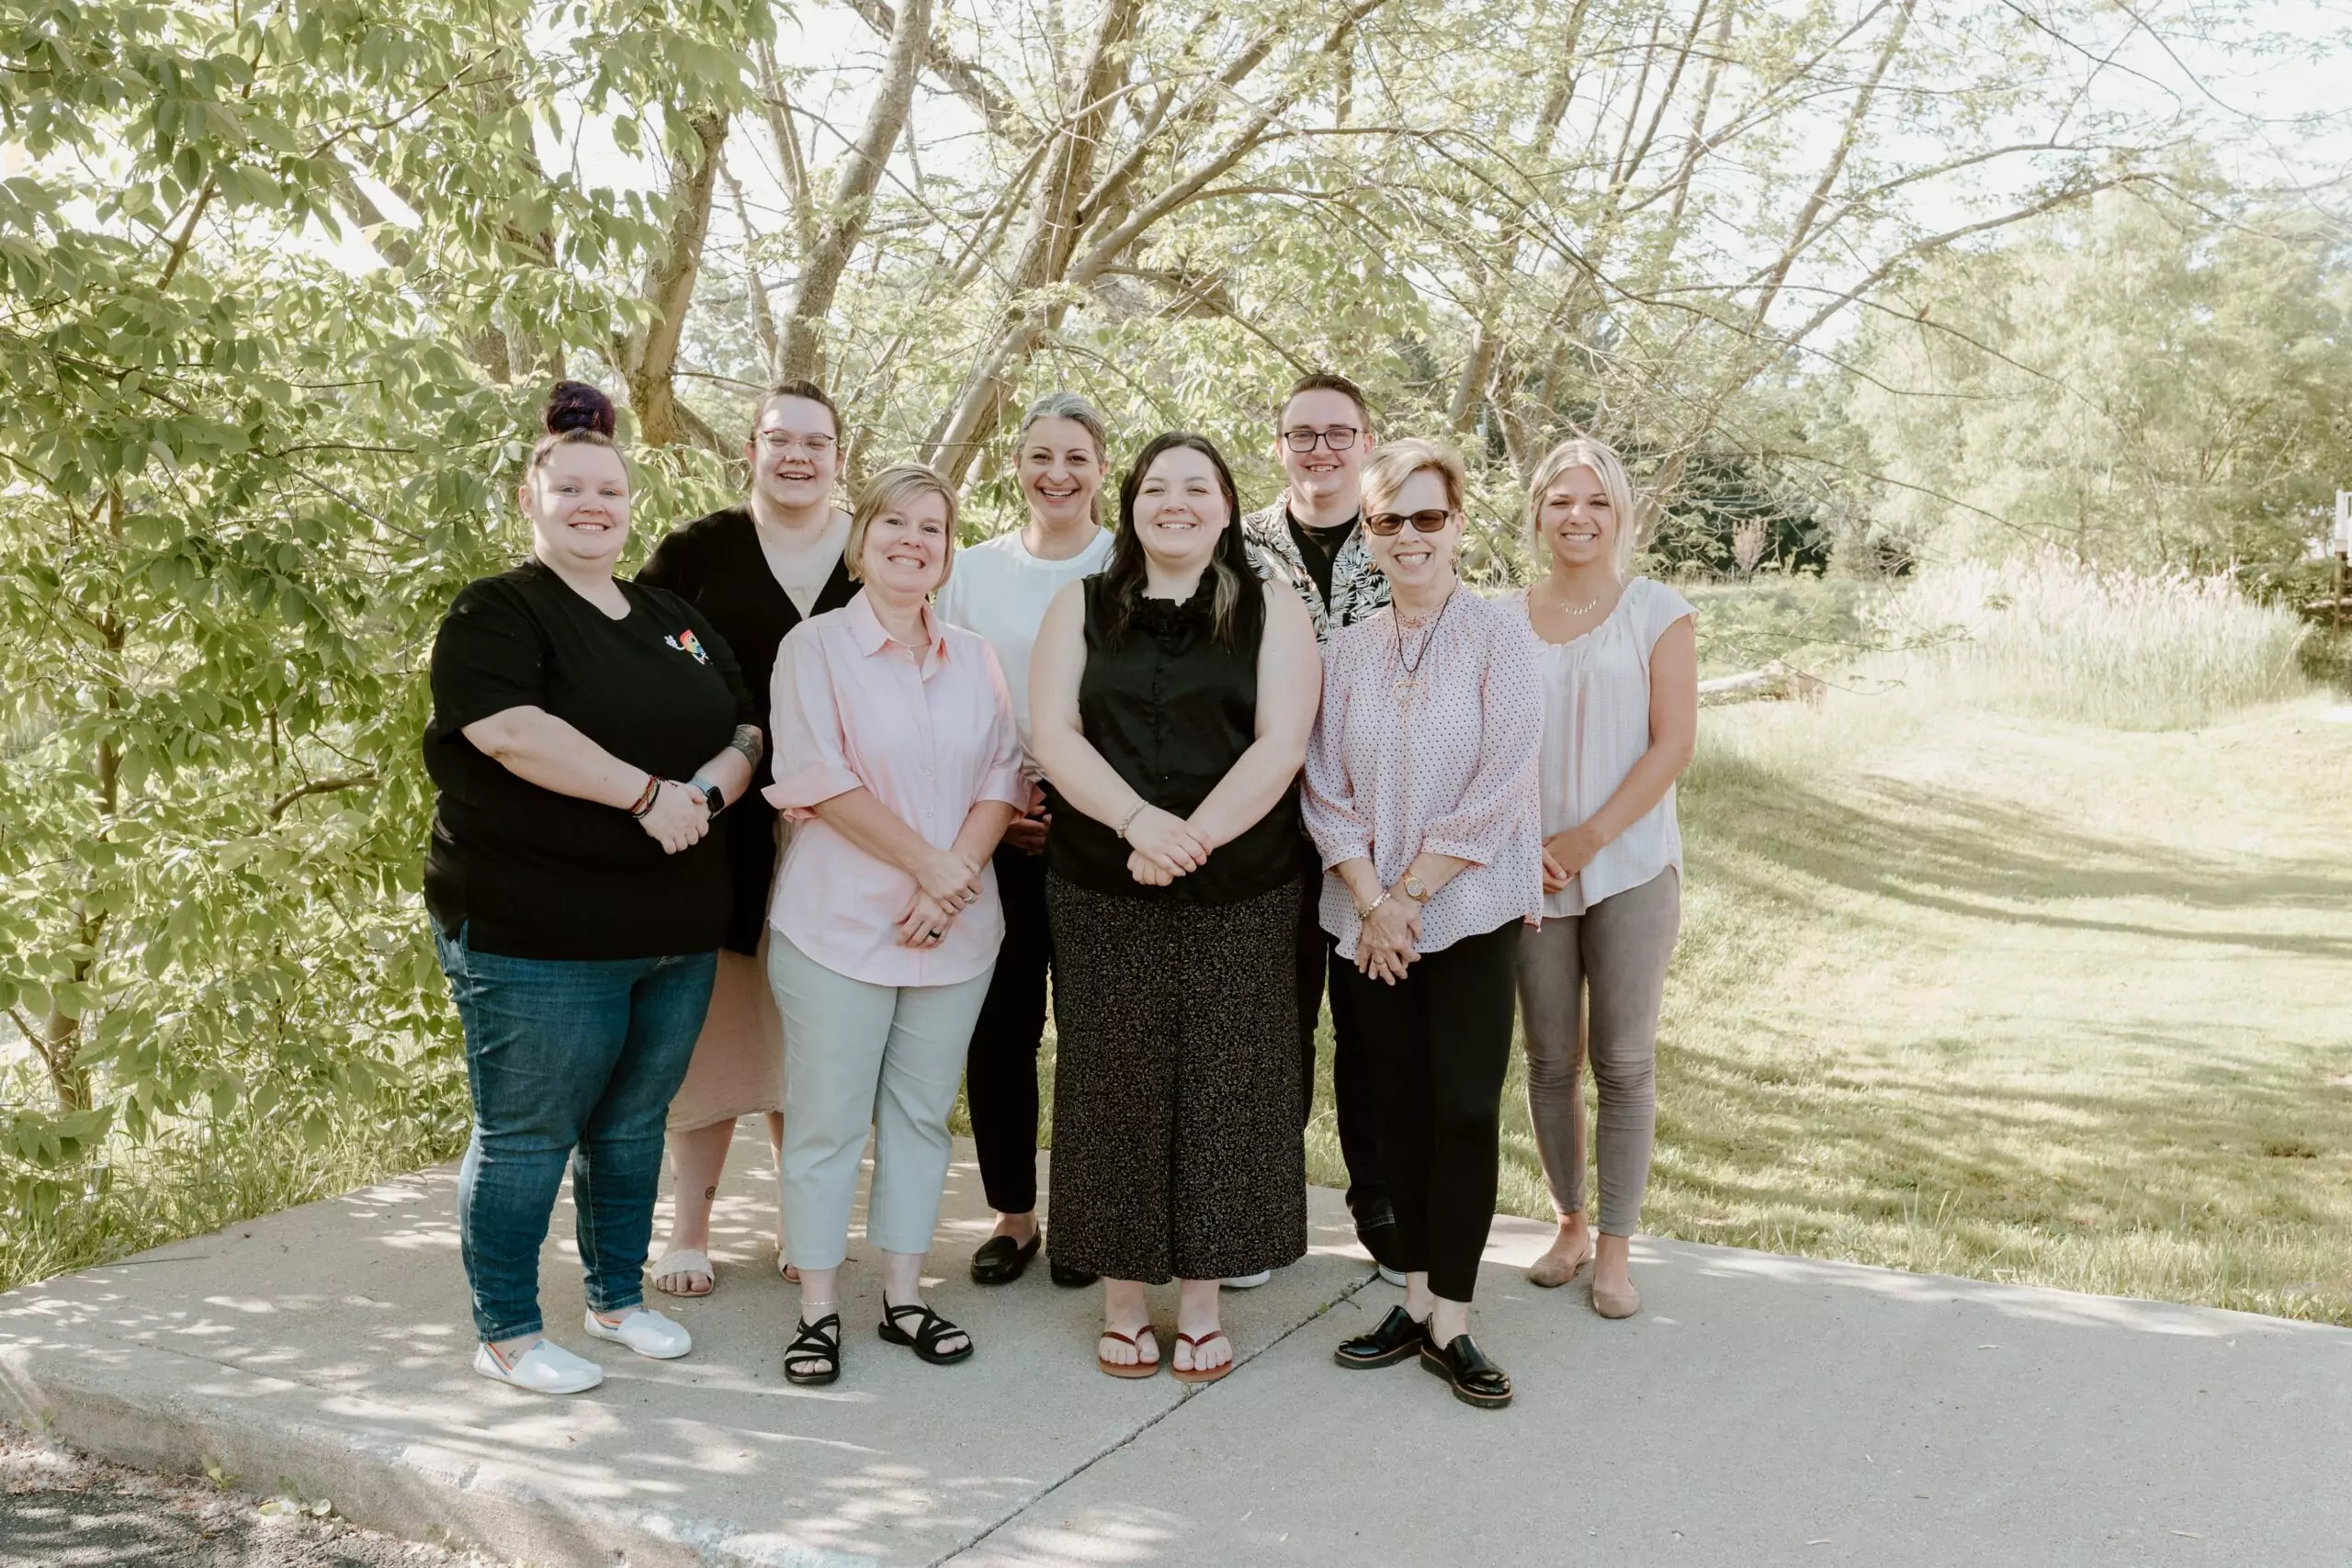 Group photo of the Intera staff outside, on a sidewalk, in front of green trees and grass. Front row L-R; Taylour, Angela, Alexis, and Sandy. Back row L-R; Amanda, Mary, Jared, and Rosemary.